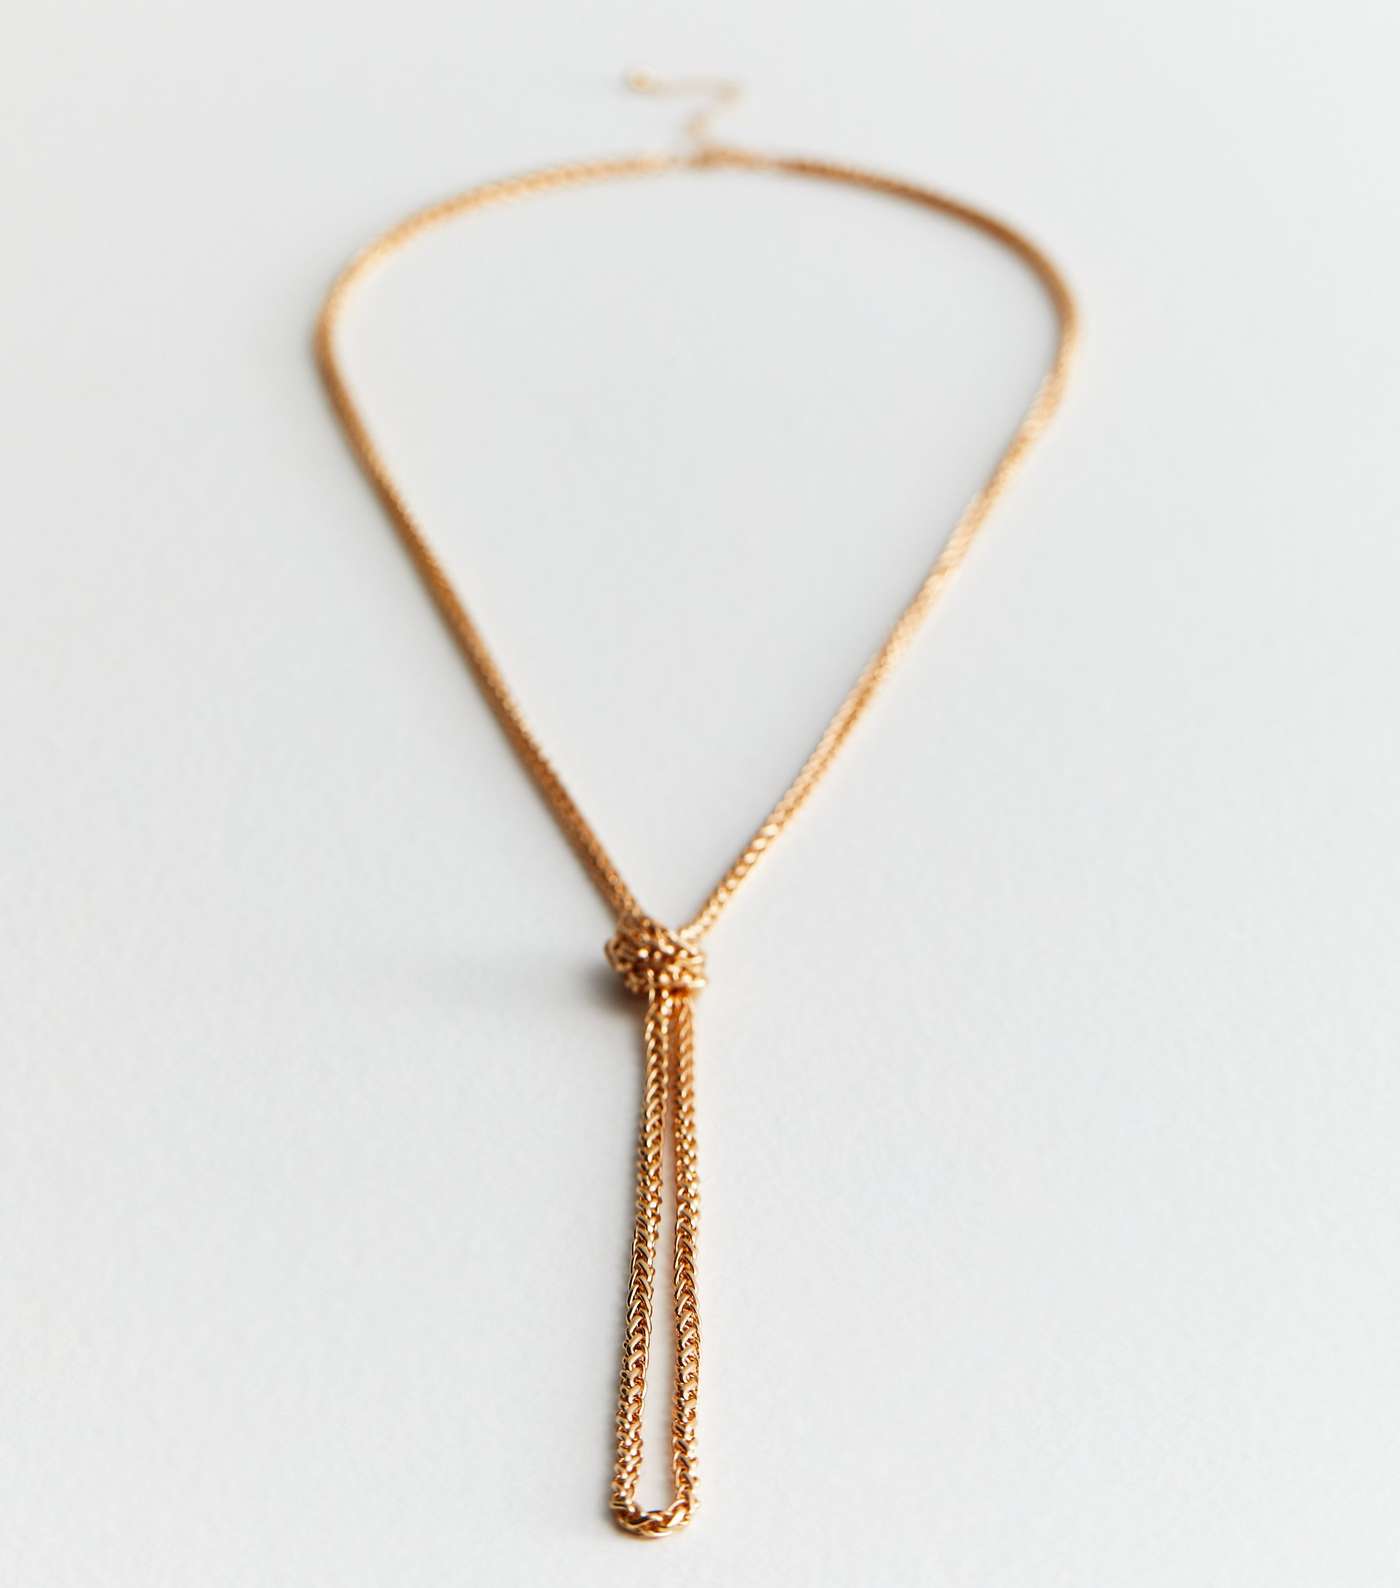 Gold Knot Pendant Long Chain Necklace Image 3